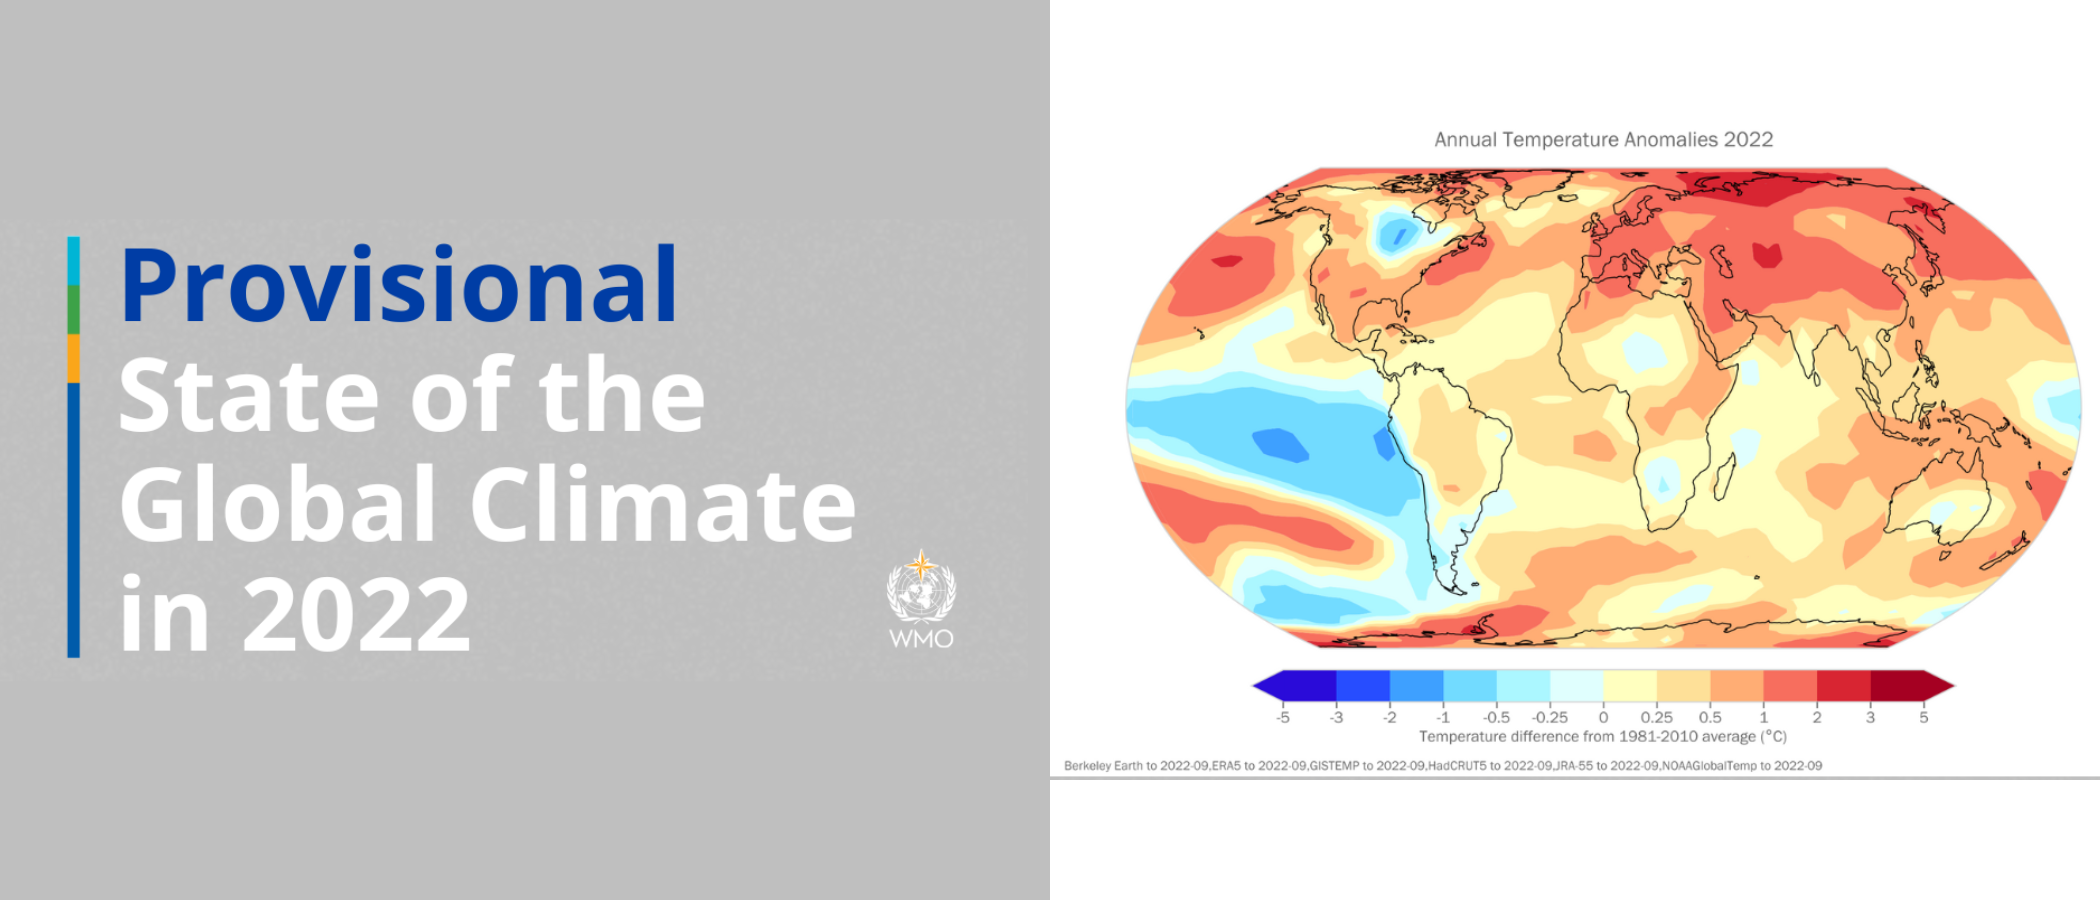 Provisional State of the Global Climate in 2022 with a graphic showing Annual Temperature anomalies as a heat map of the world showing the temperature difference from 1981-2010. Most of the map is yellow, amber or red